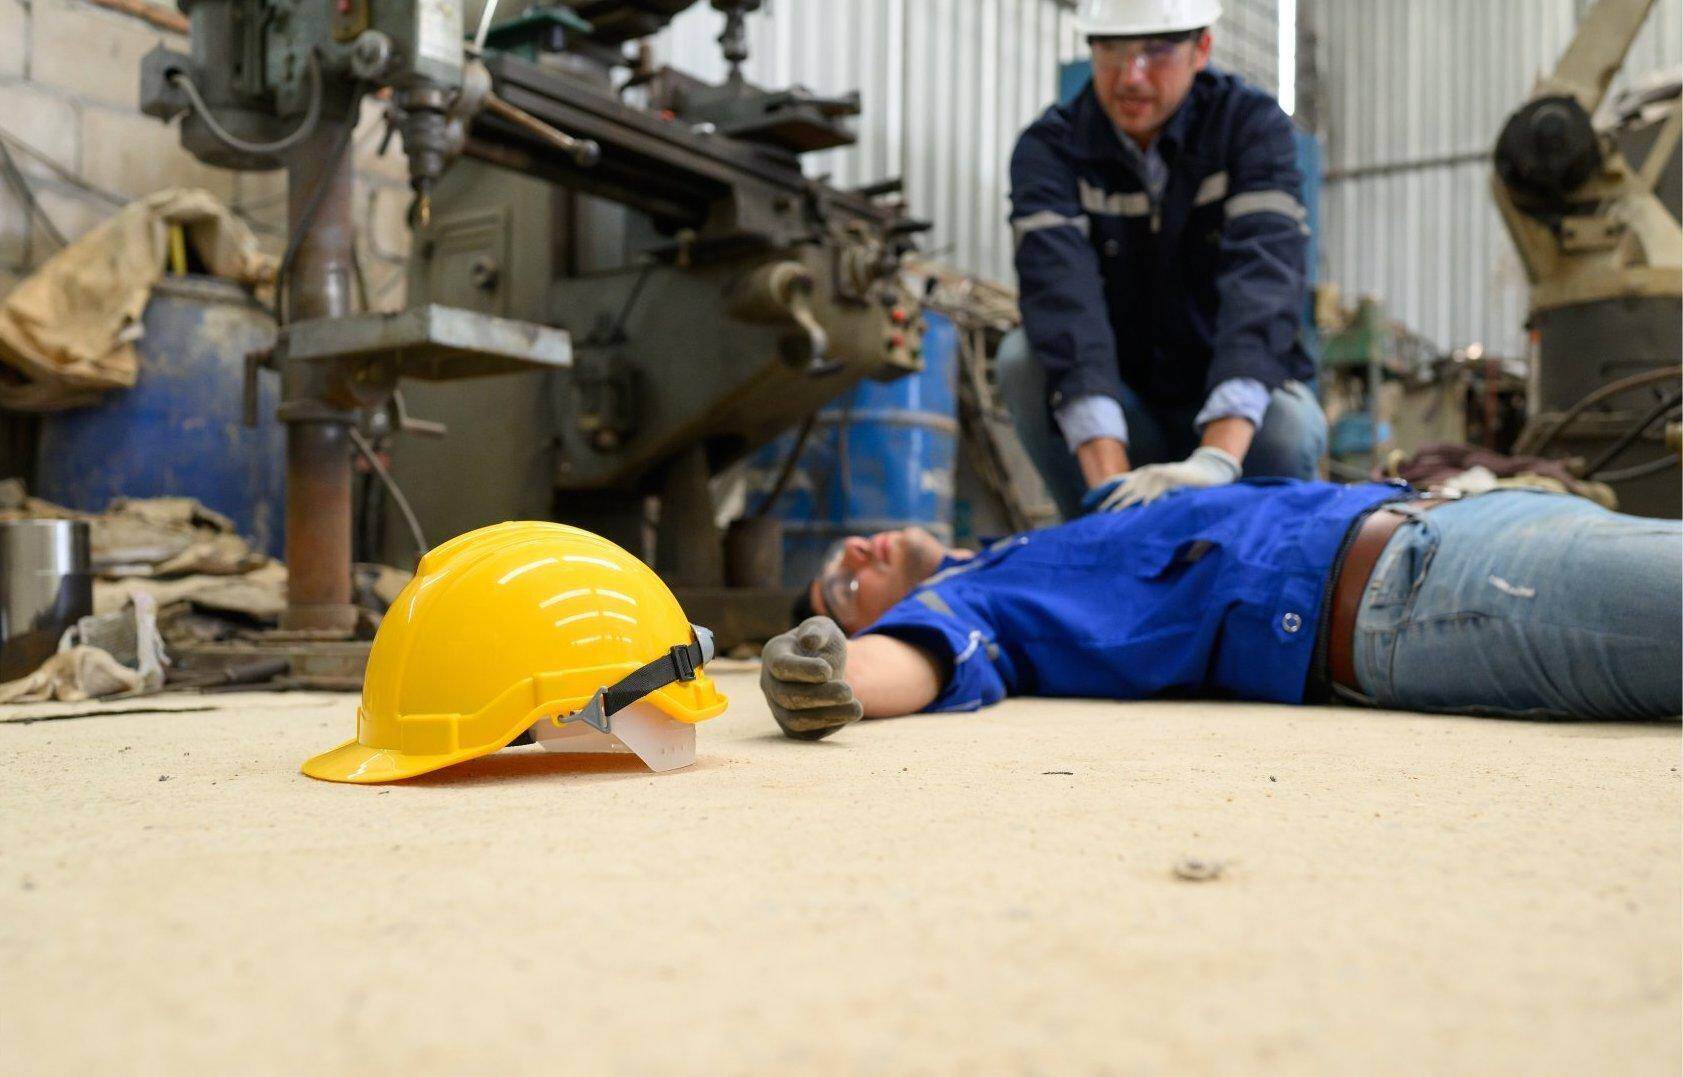 An unconscious man who has been injured on the job who will file for workers compensation in Carrollton, Georgia